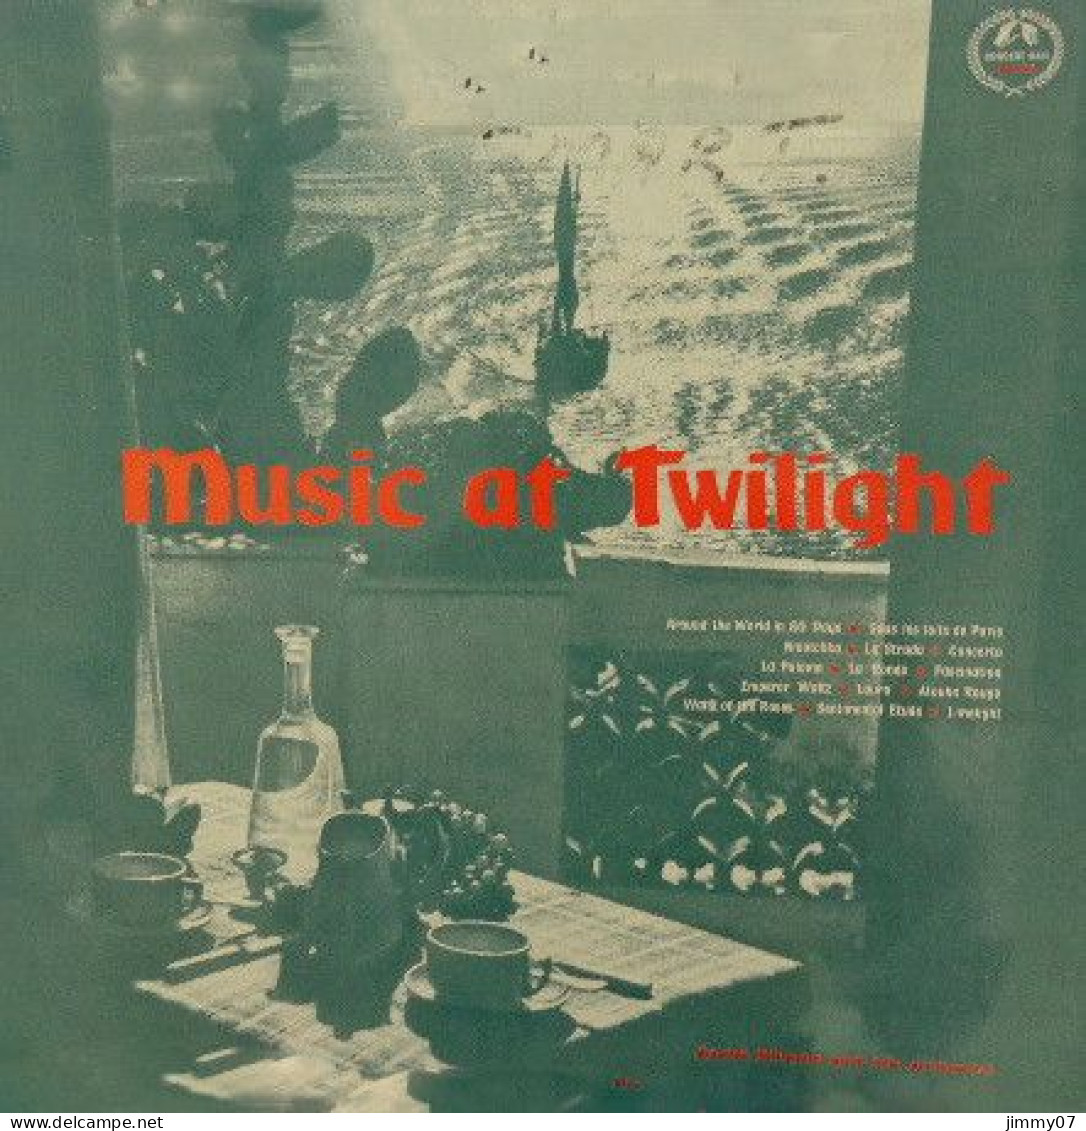 Andre Silvano And His Orchestra - Music At Twilight (LP) - Clásica